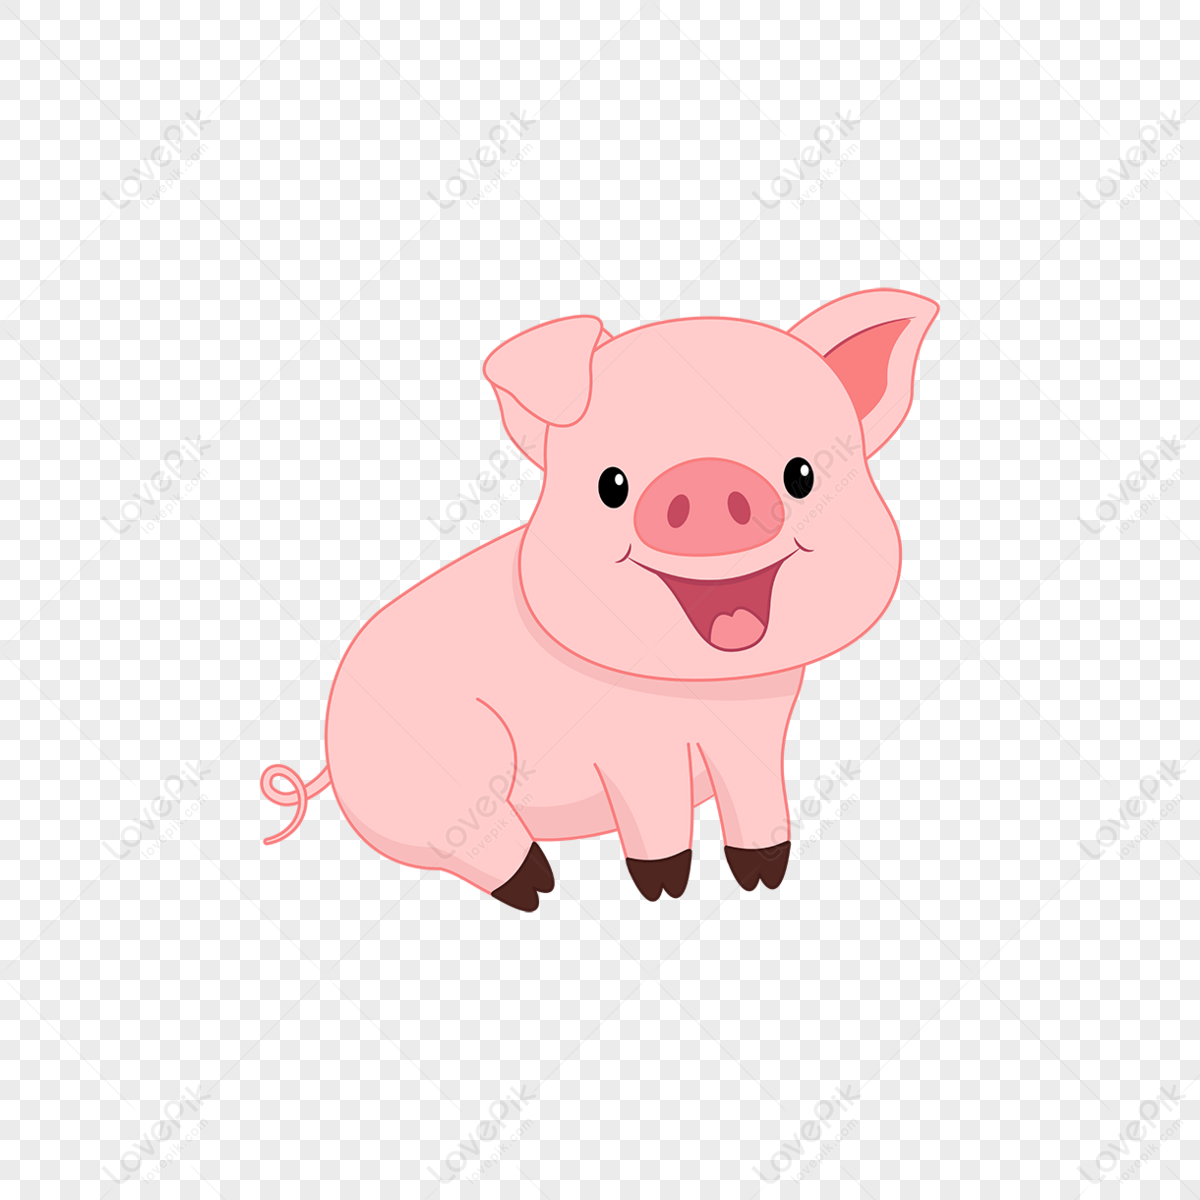 Pink laughing pig cartoon material funny vector animal pig clipart,zoo,clip art style png transparent background